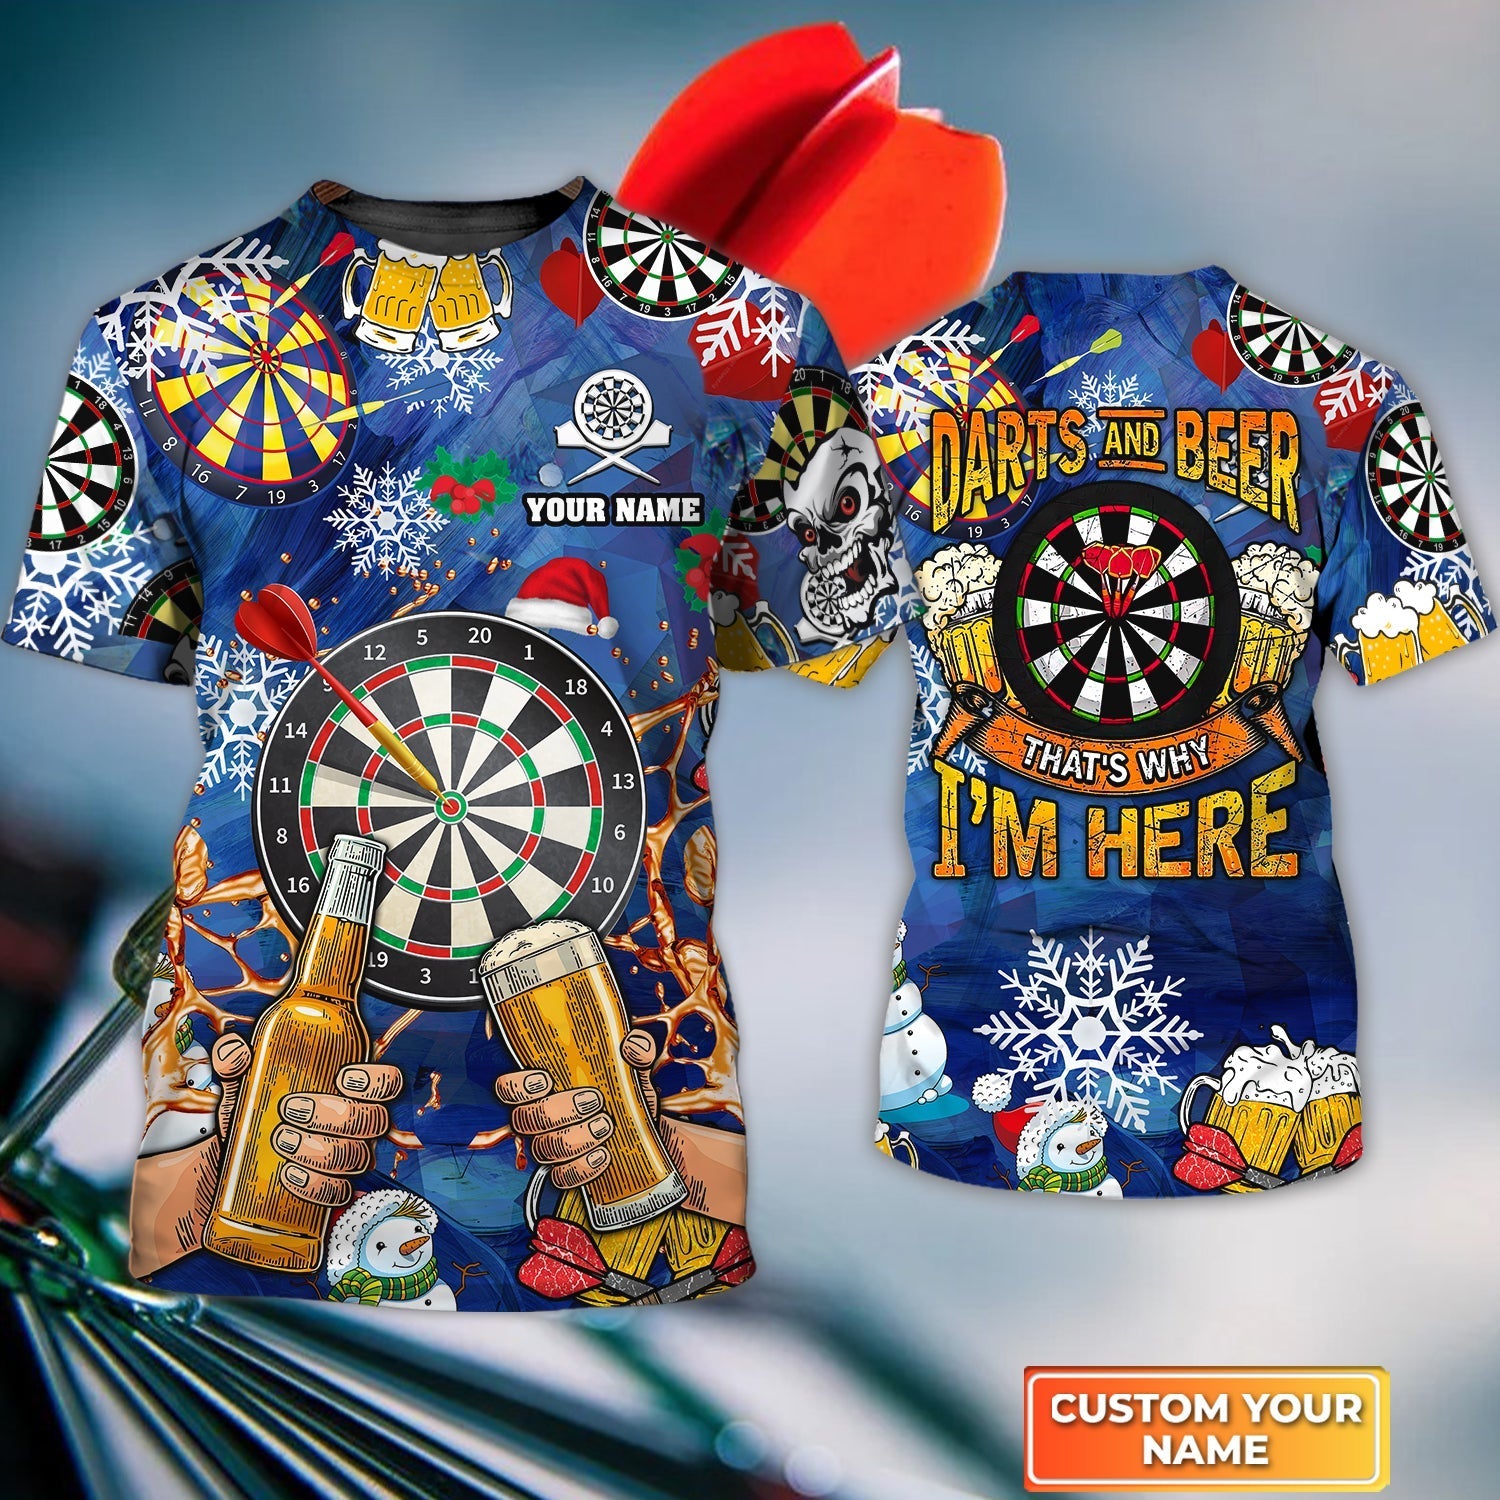 Darts And Beer That’s Why I’m Here Christmas Gift, Personalized Name 3D Tshirt For Darts Player – DT201